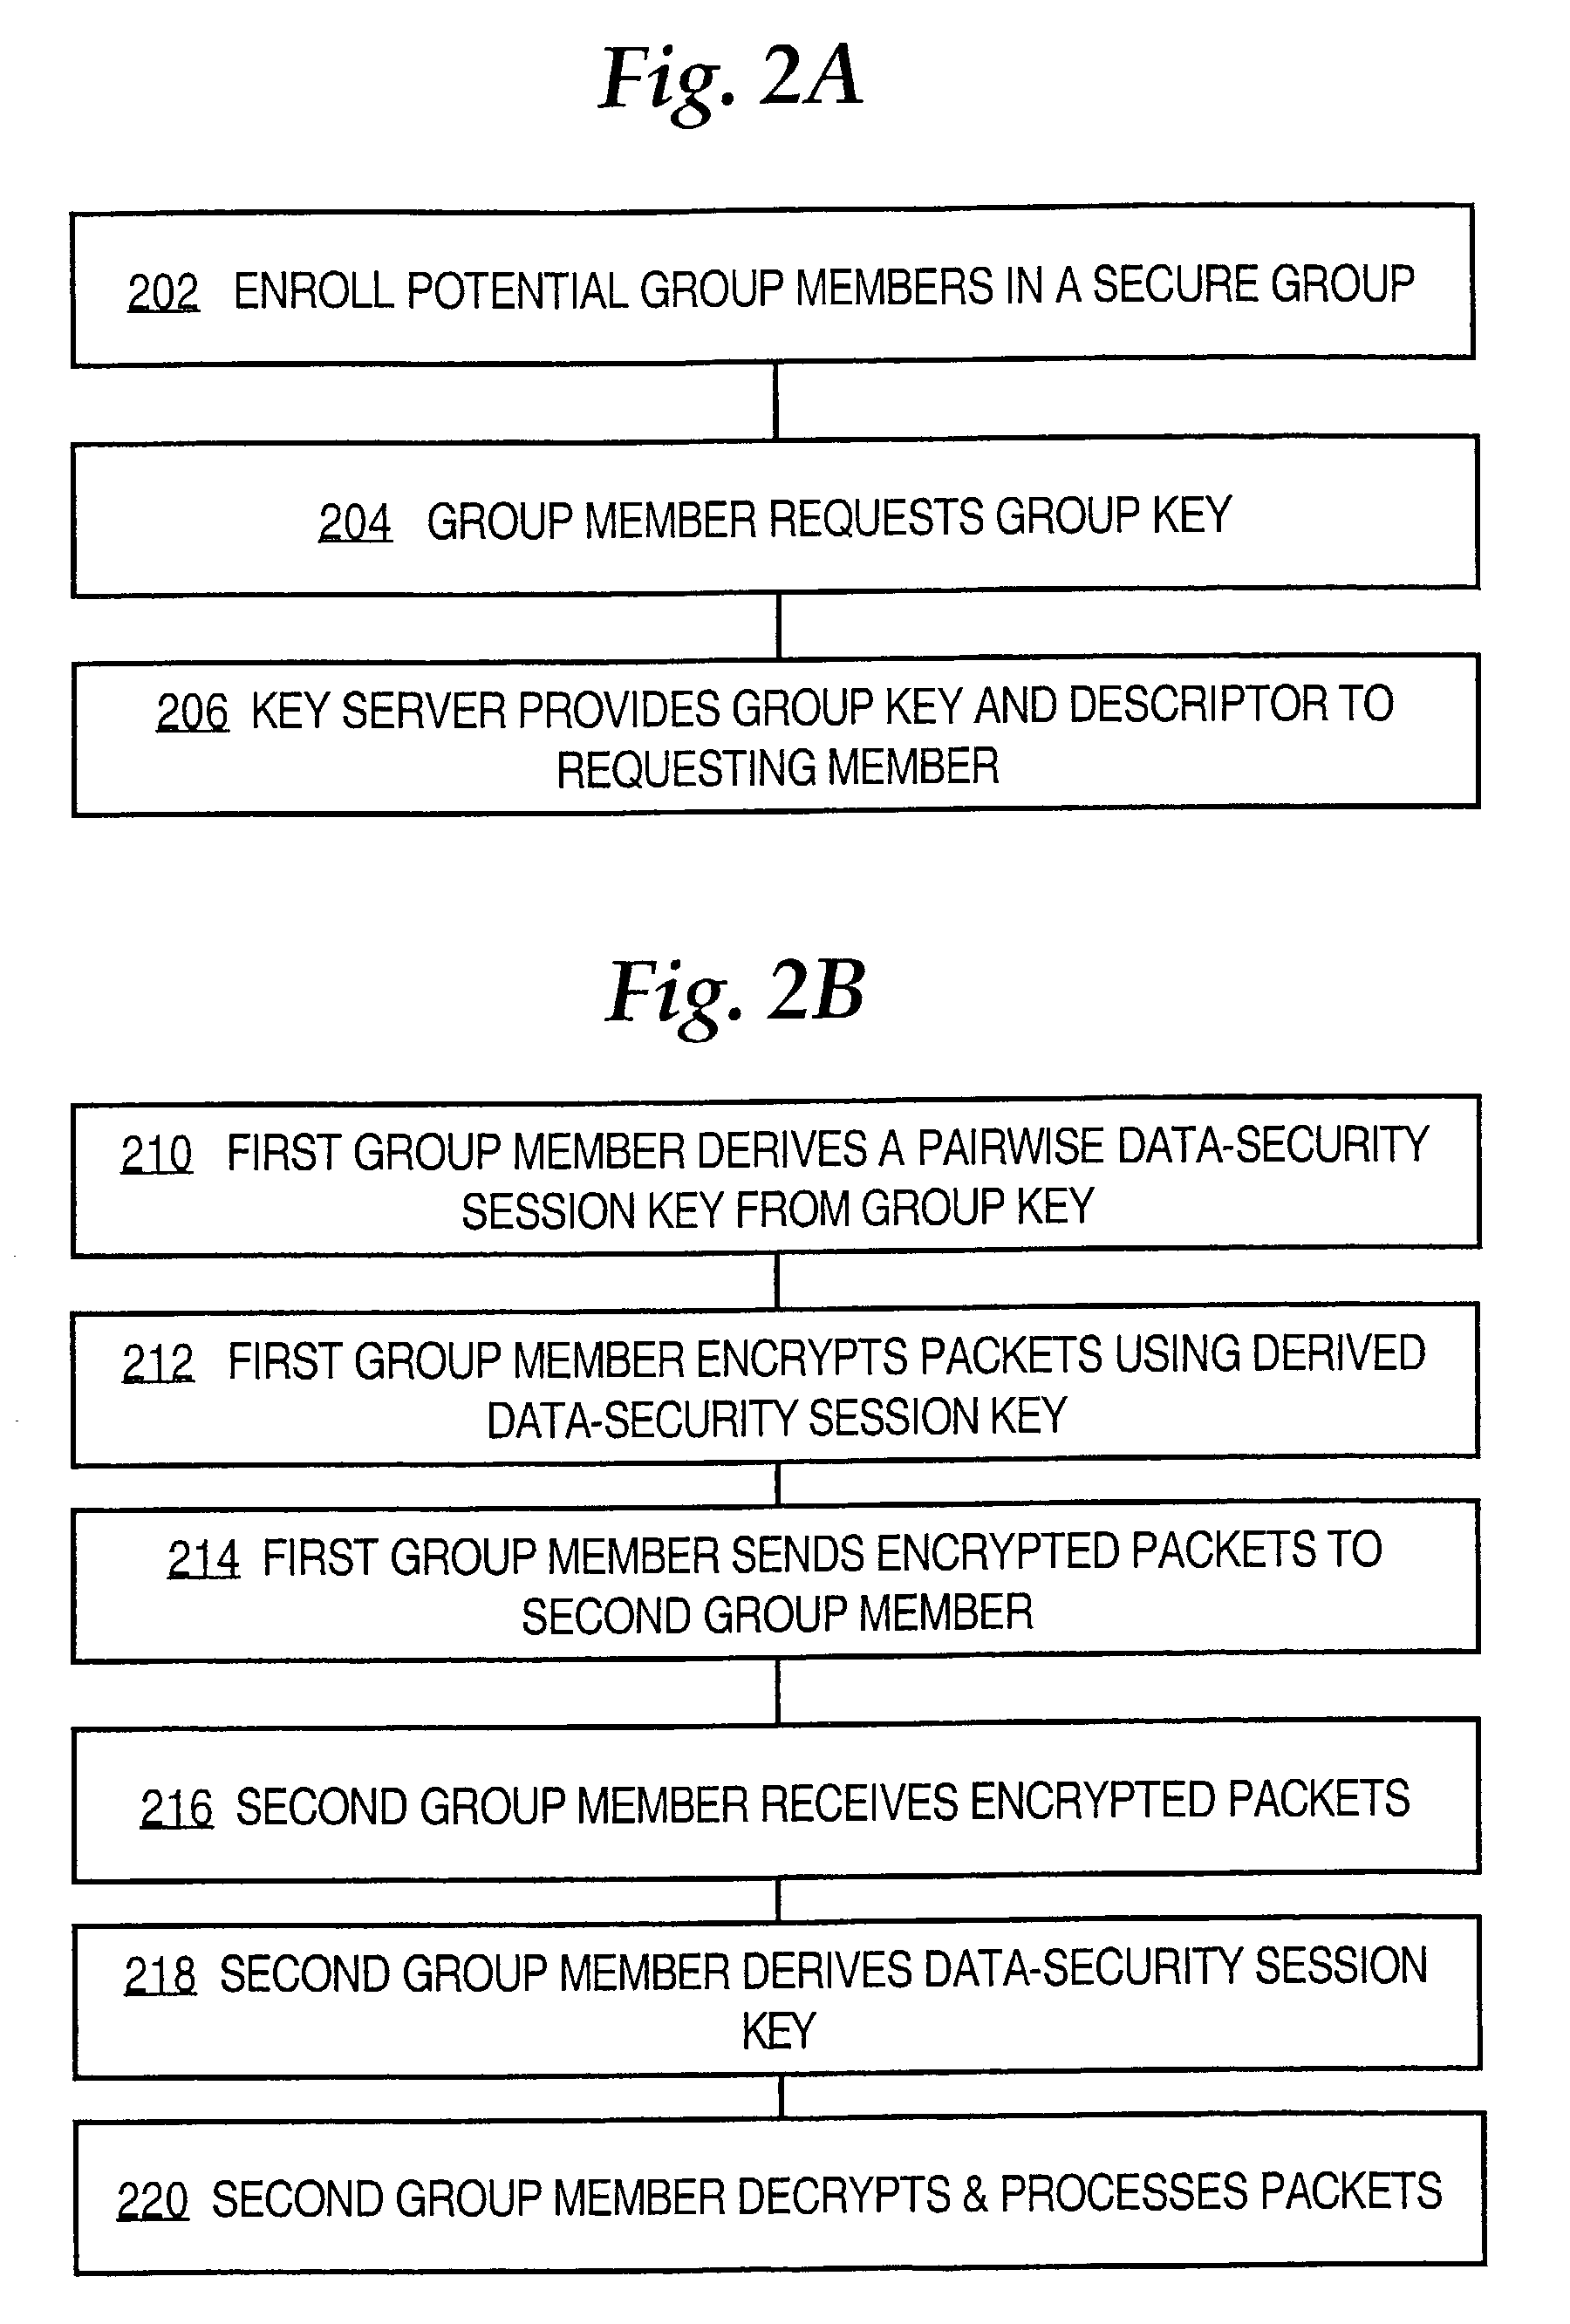 Method and apparatus for generating pairwise cryptographic transforms based on group keys